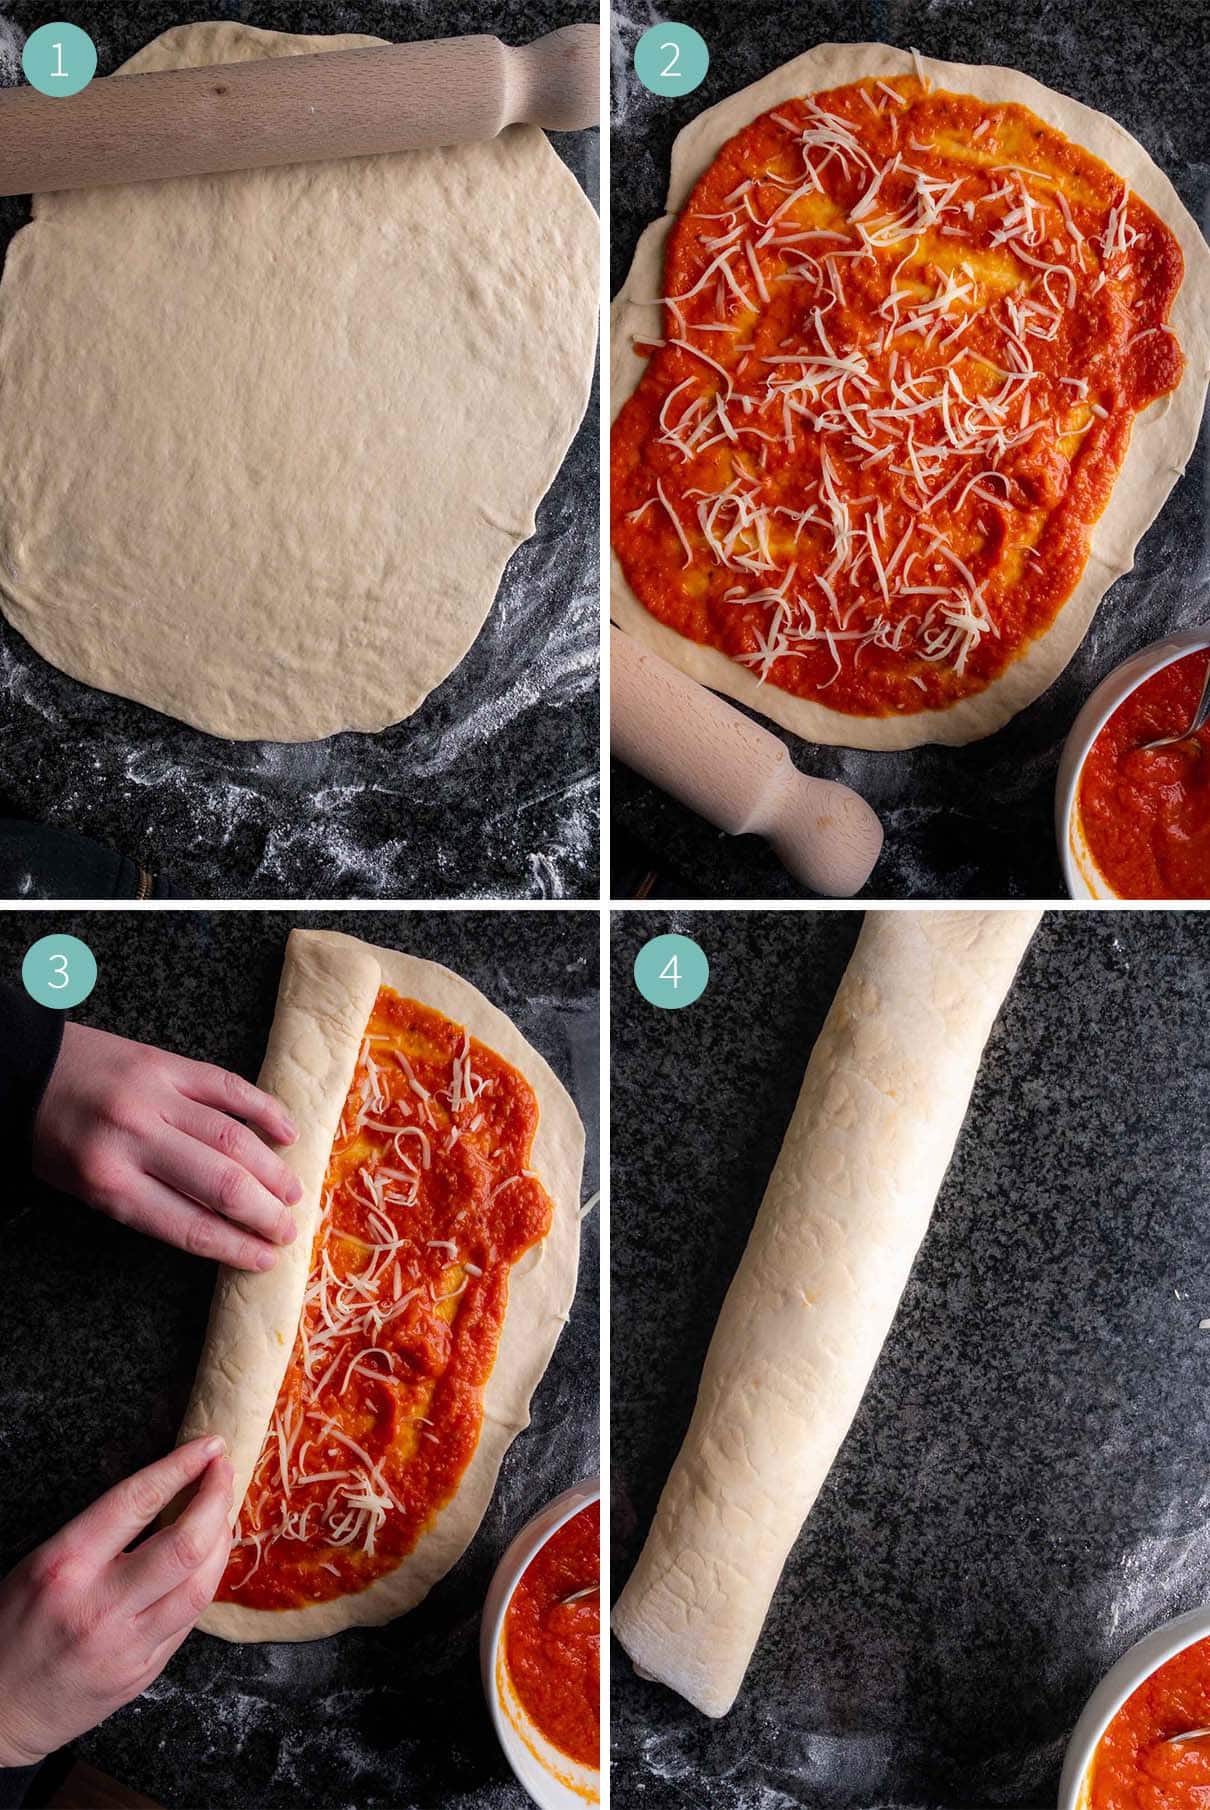 How to make air fryer pizza rolls - Step 1 to 4 in pictures